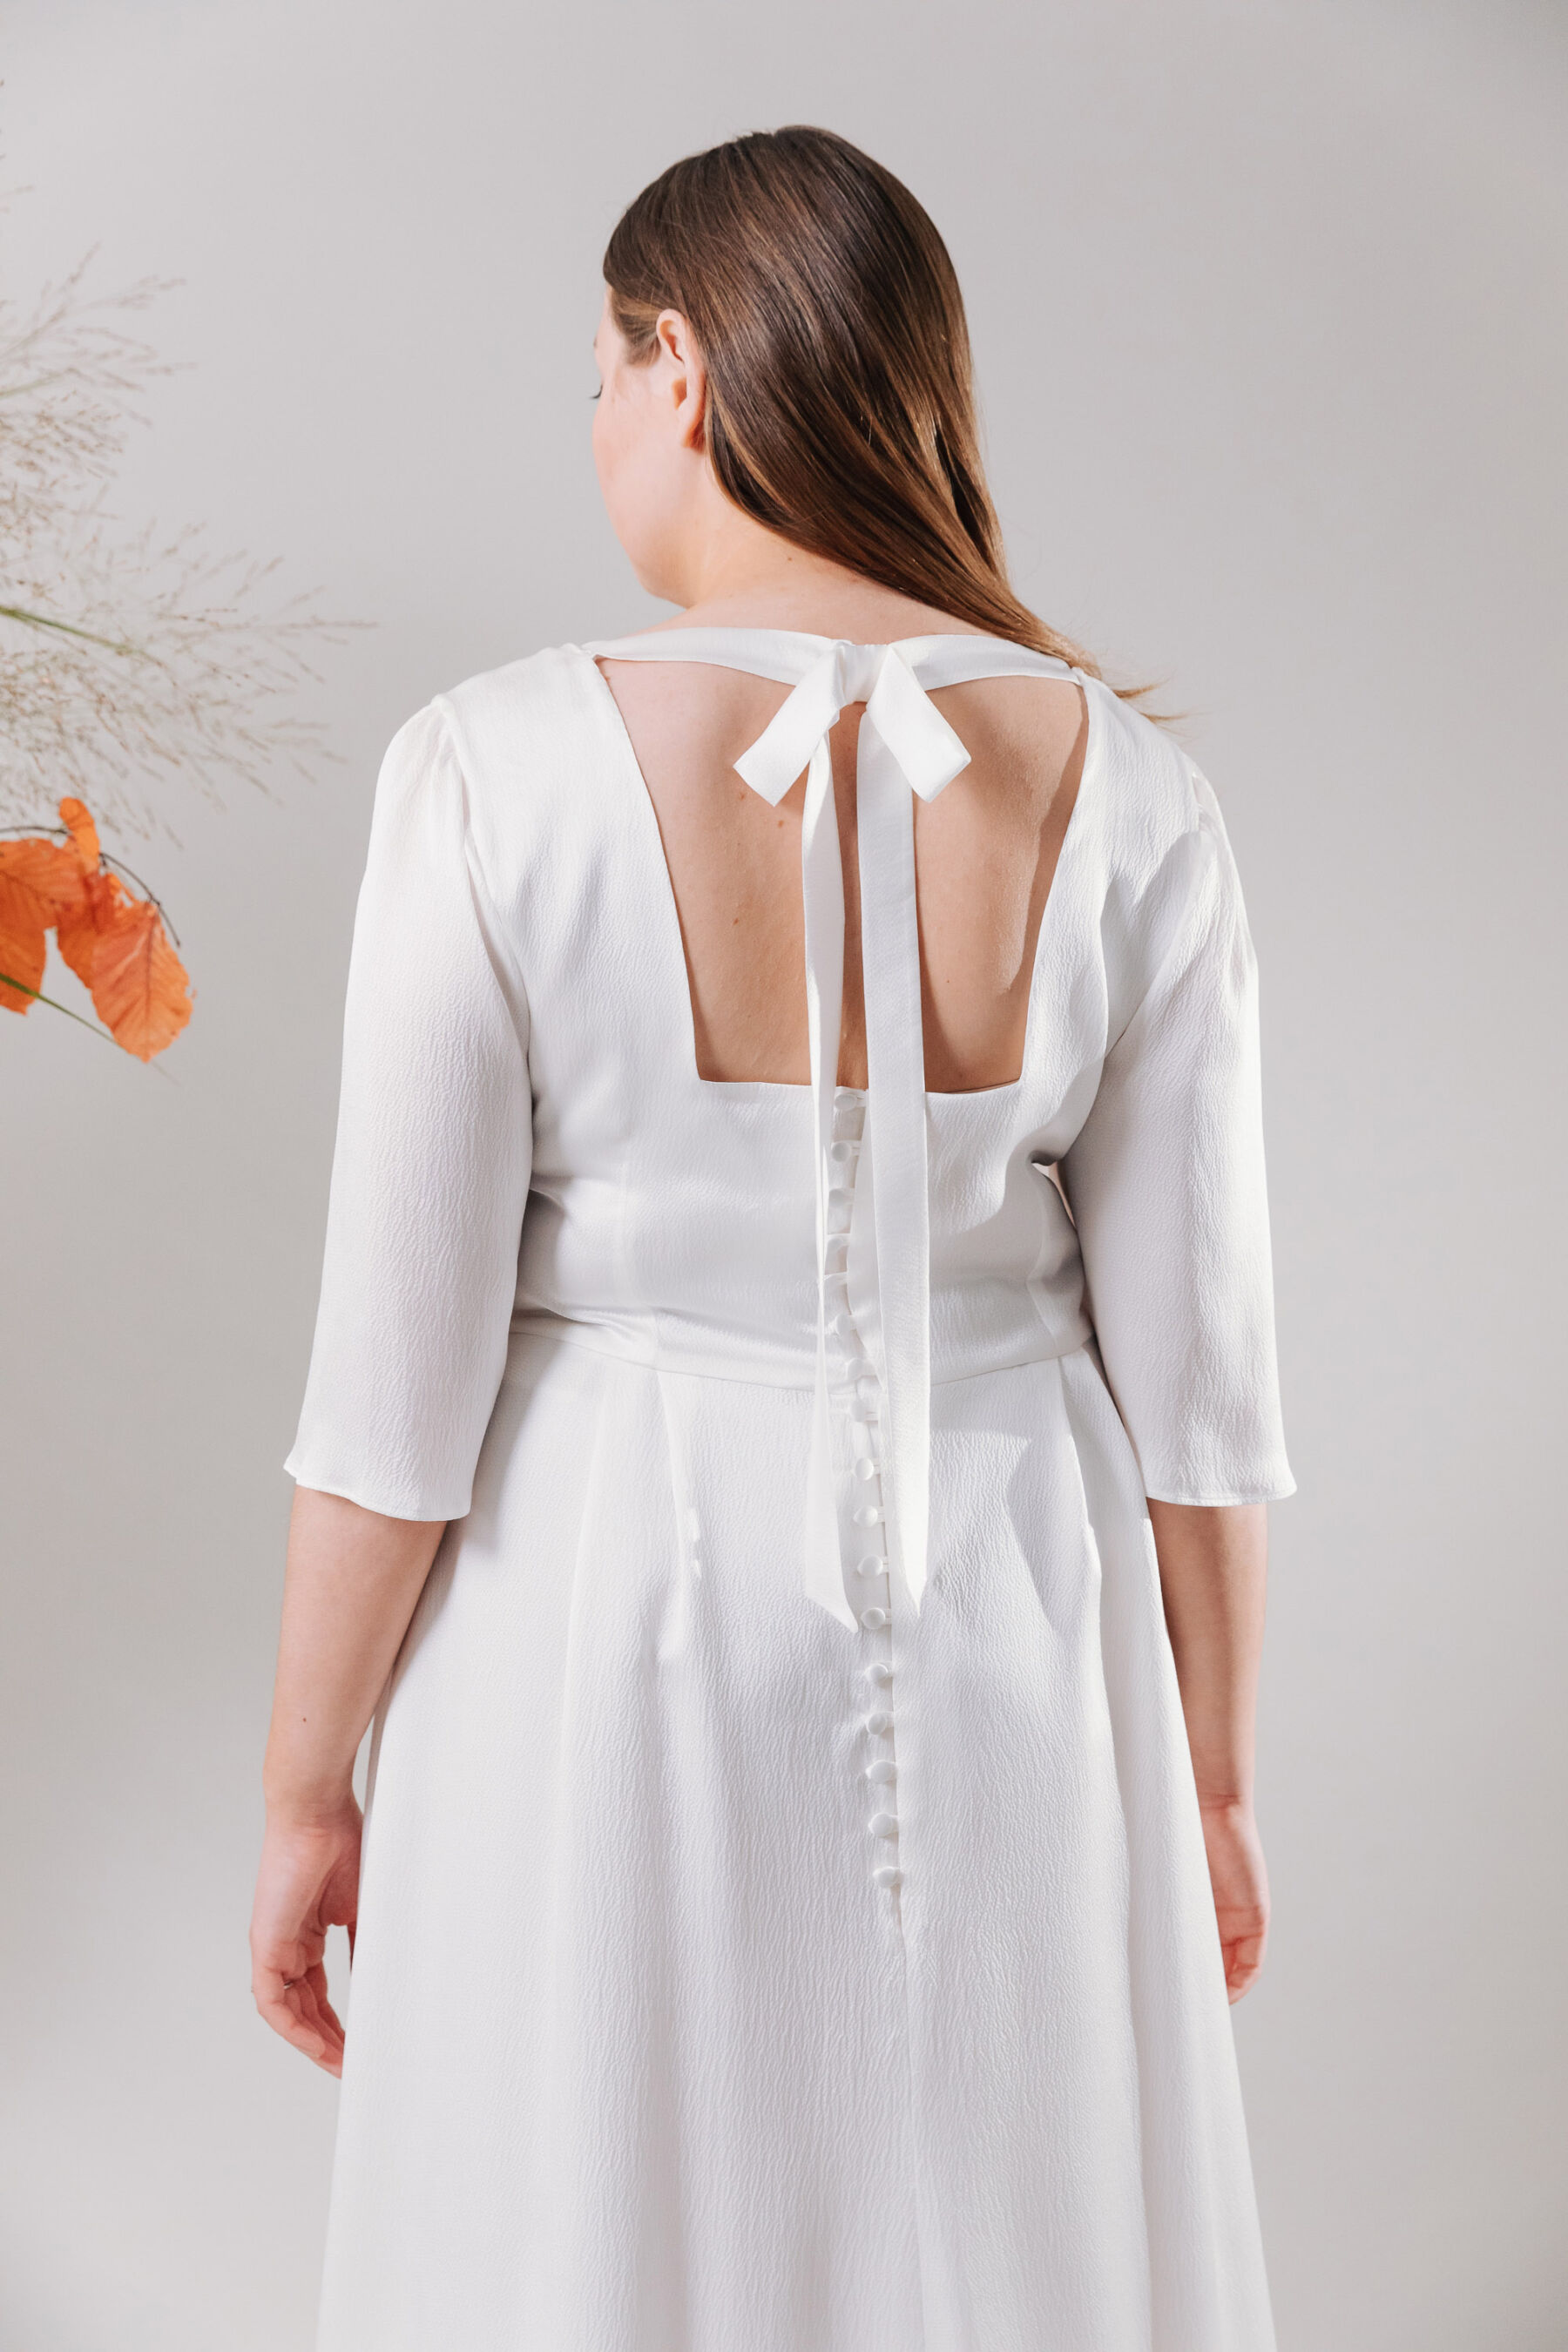 Back of a curvy bride wedding dress by Kate Beaumont